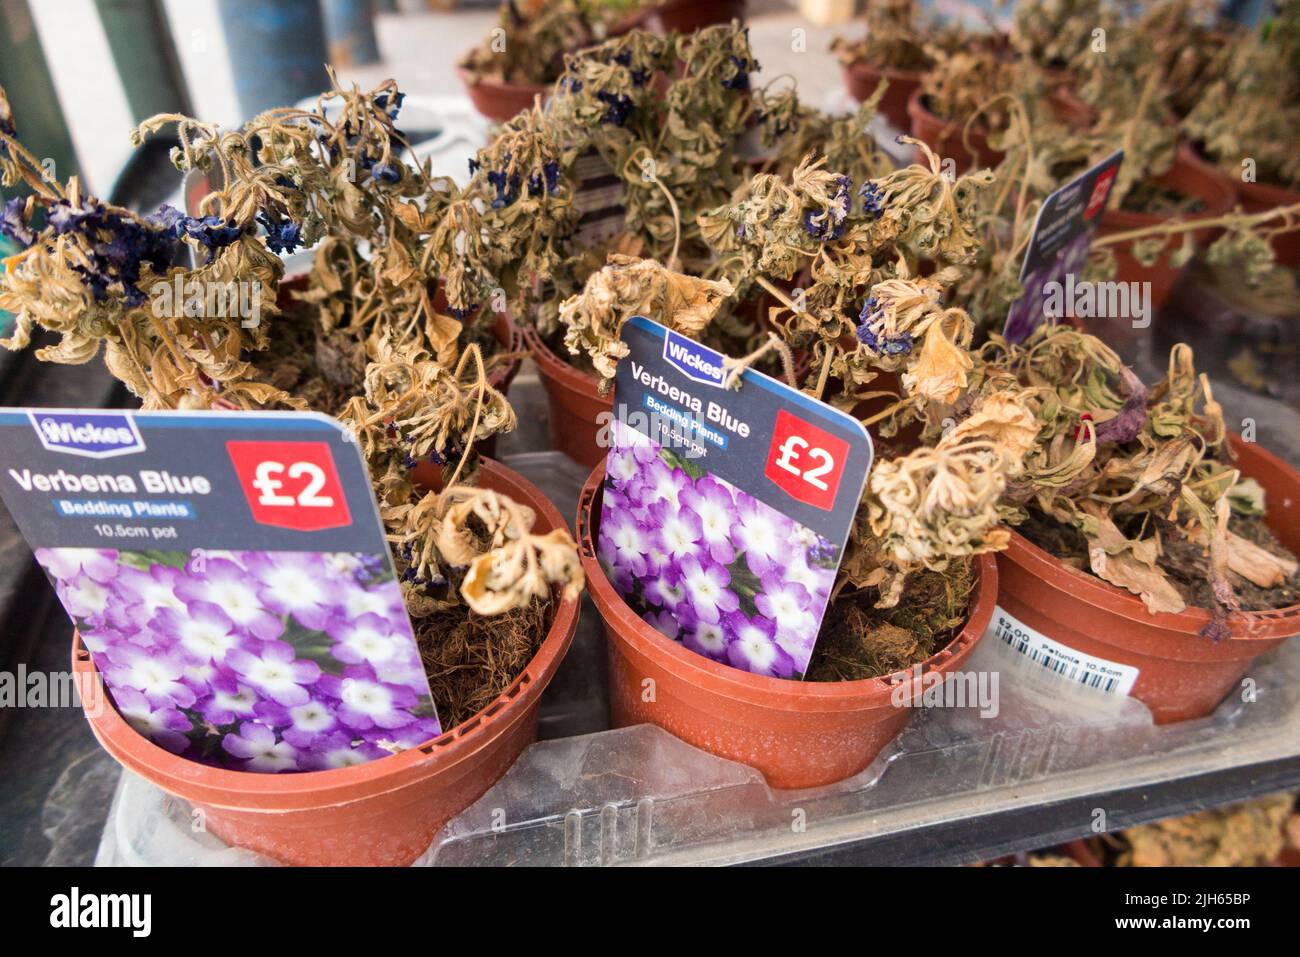 Flower / flowers / bedding plant for sale at Wickes DIY store supermarket. Wilted wilting plants are dying due to lack of care / watering / shortage of water. UK. (131) Stock Photo